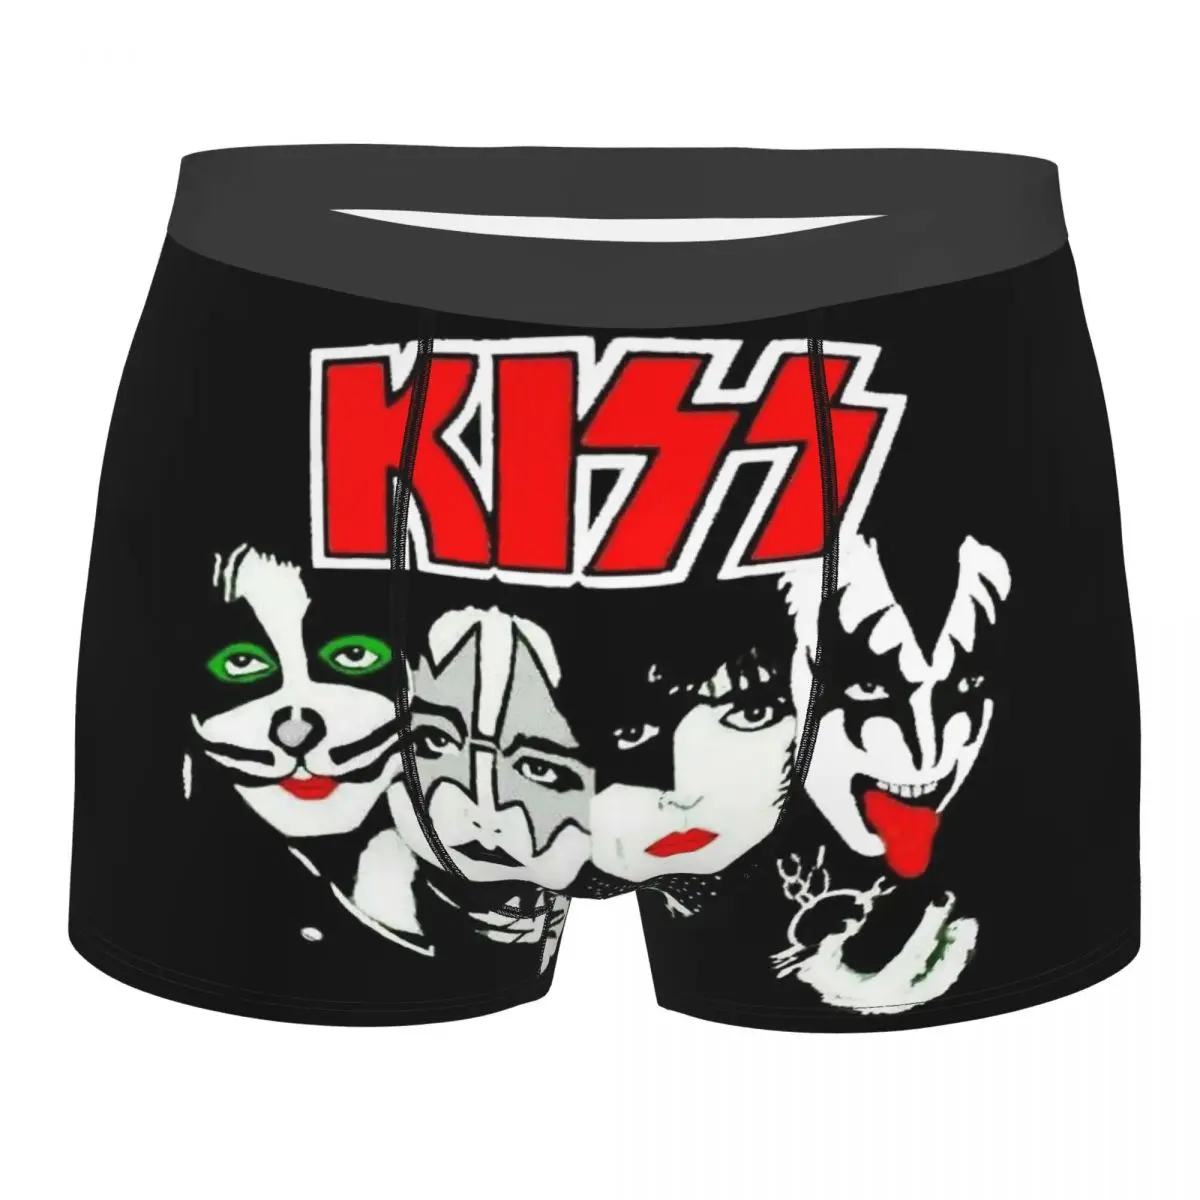 The Demon Kiss Band Gene Simmons Accessories Crew Man's Boxer Briefs Underpants Highly Breathable Top Quality Gift Idea